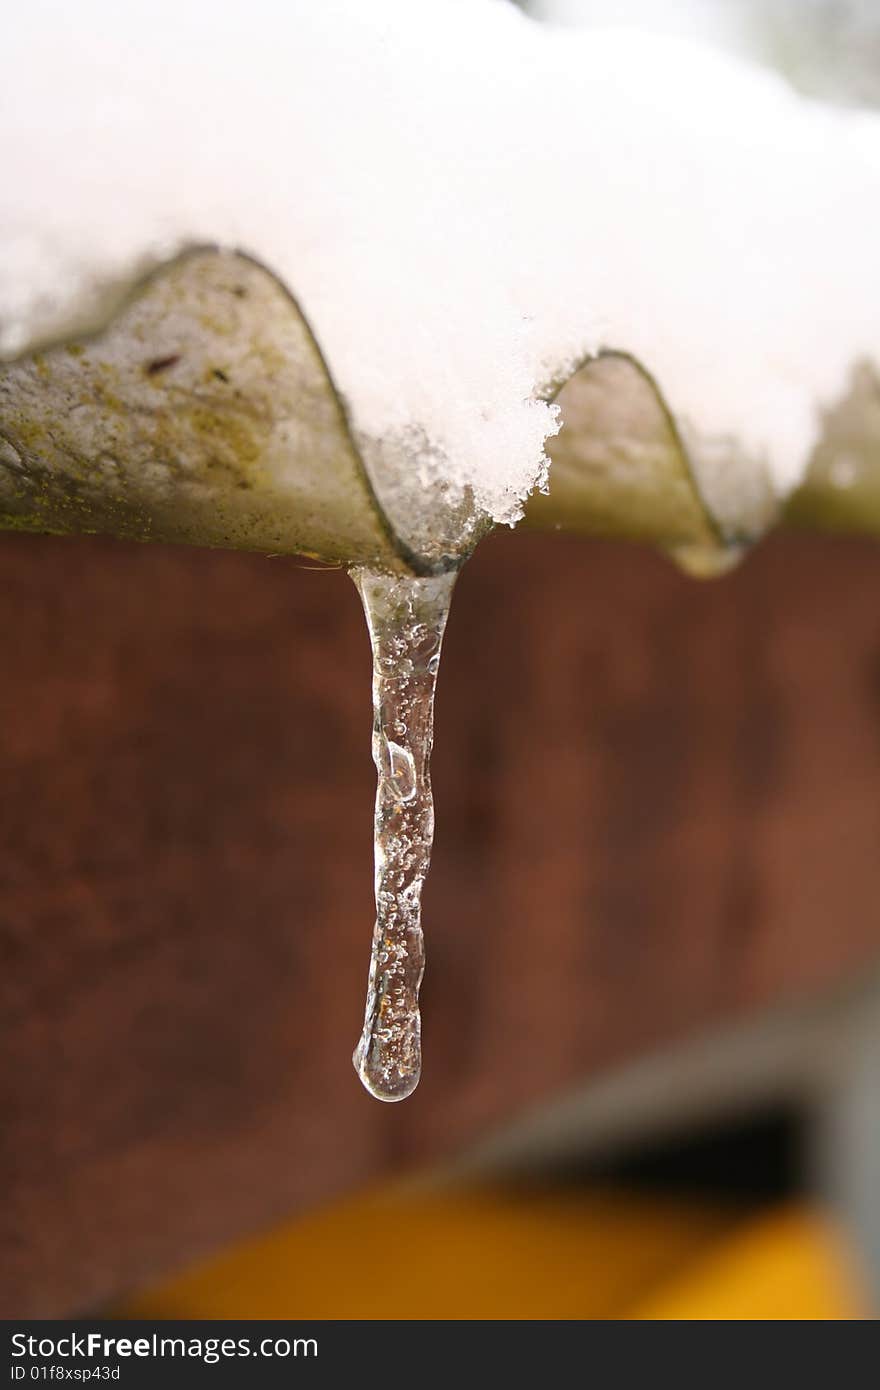 An Icicle forms as the snow melts